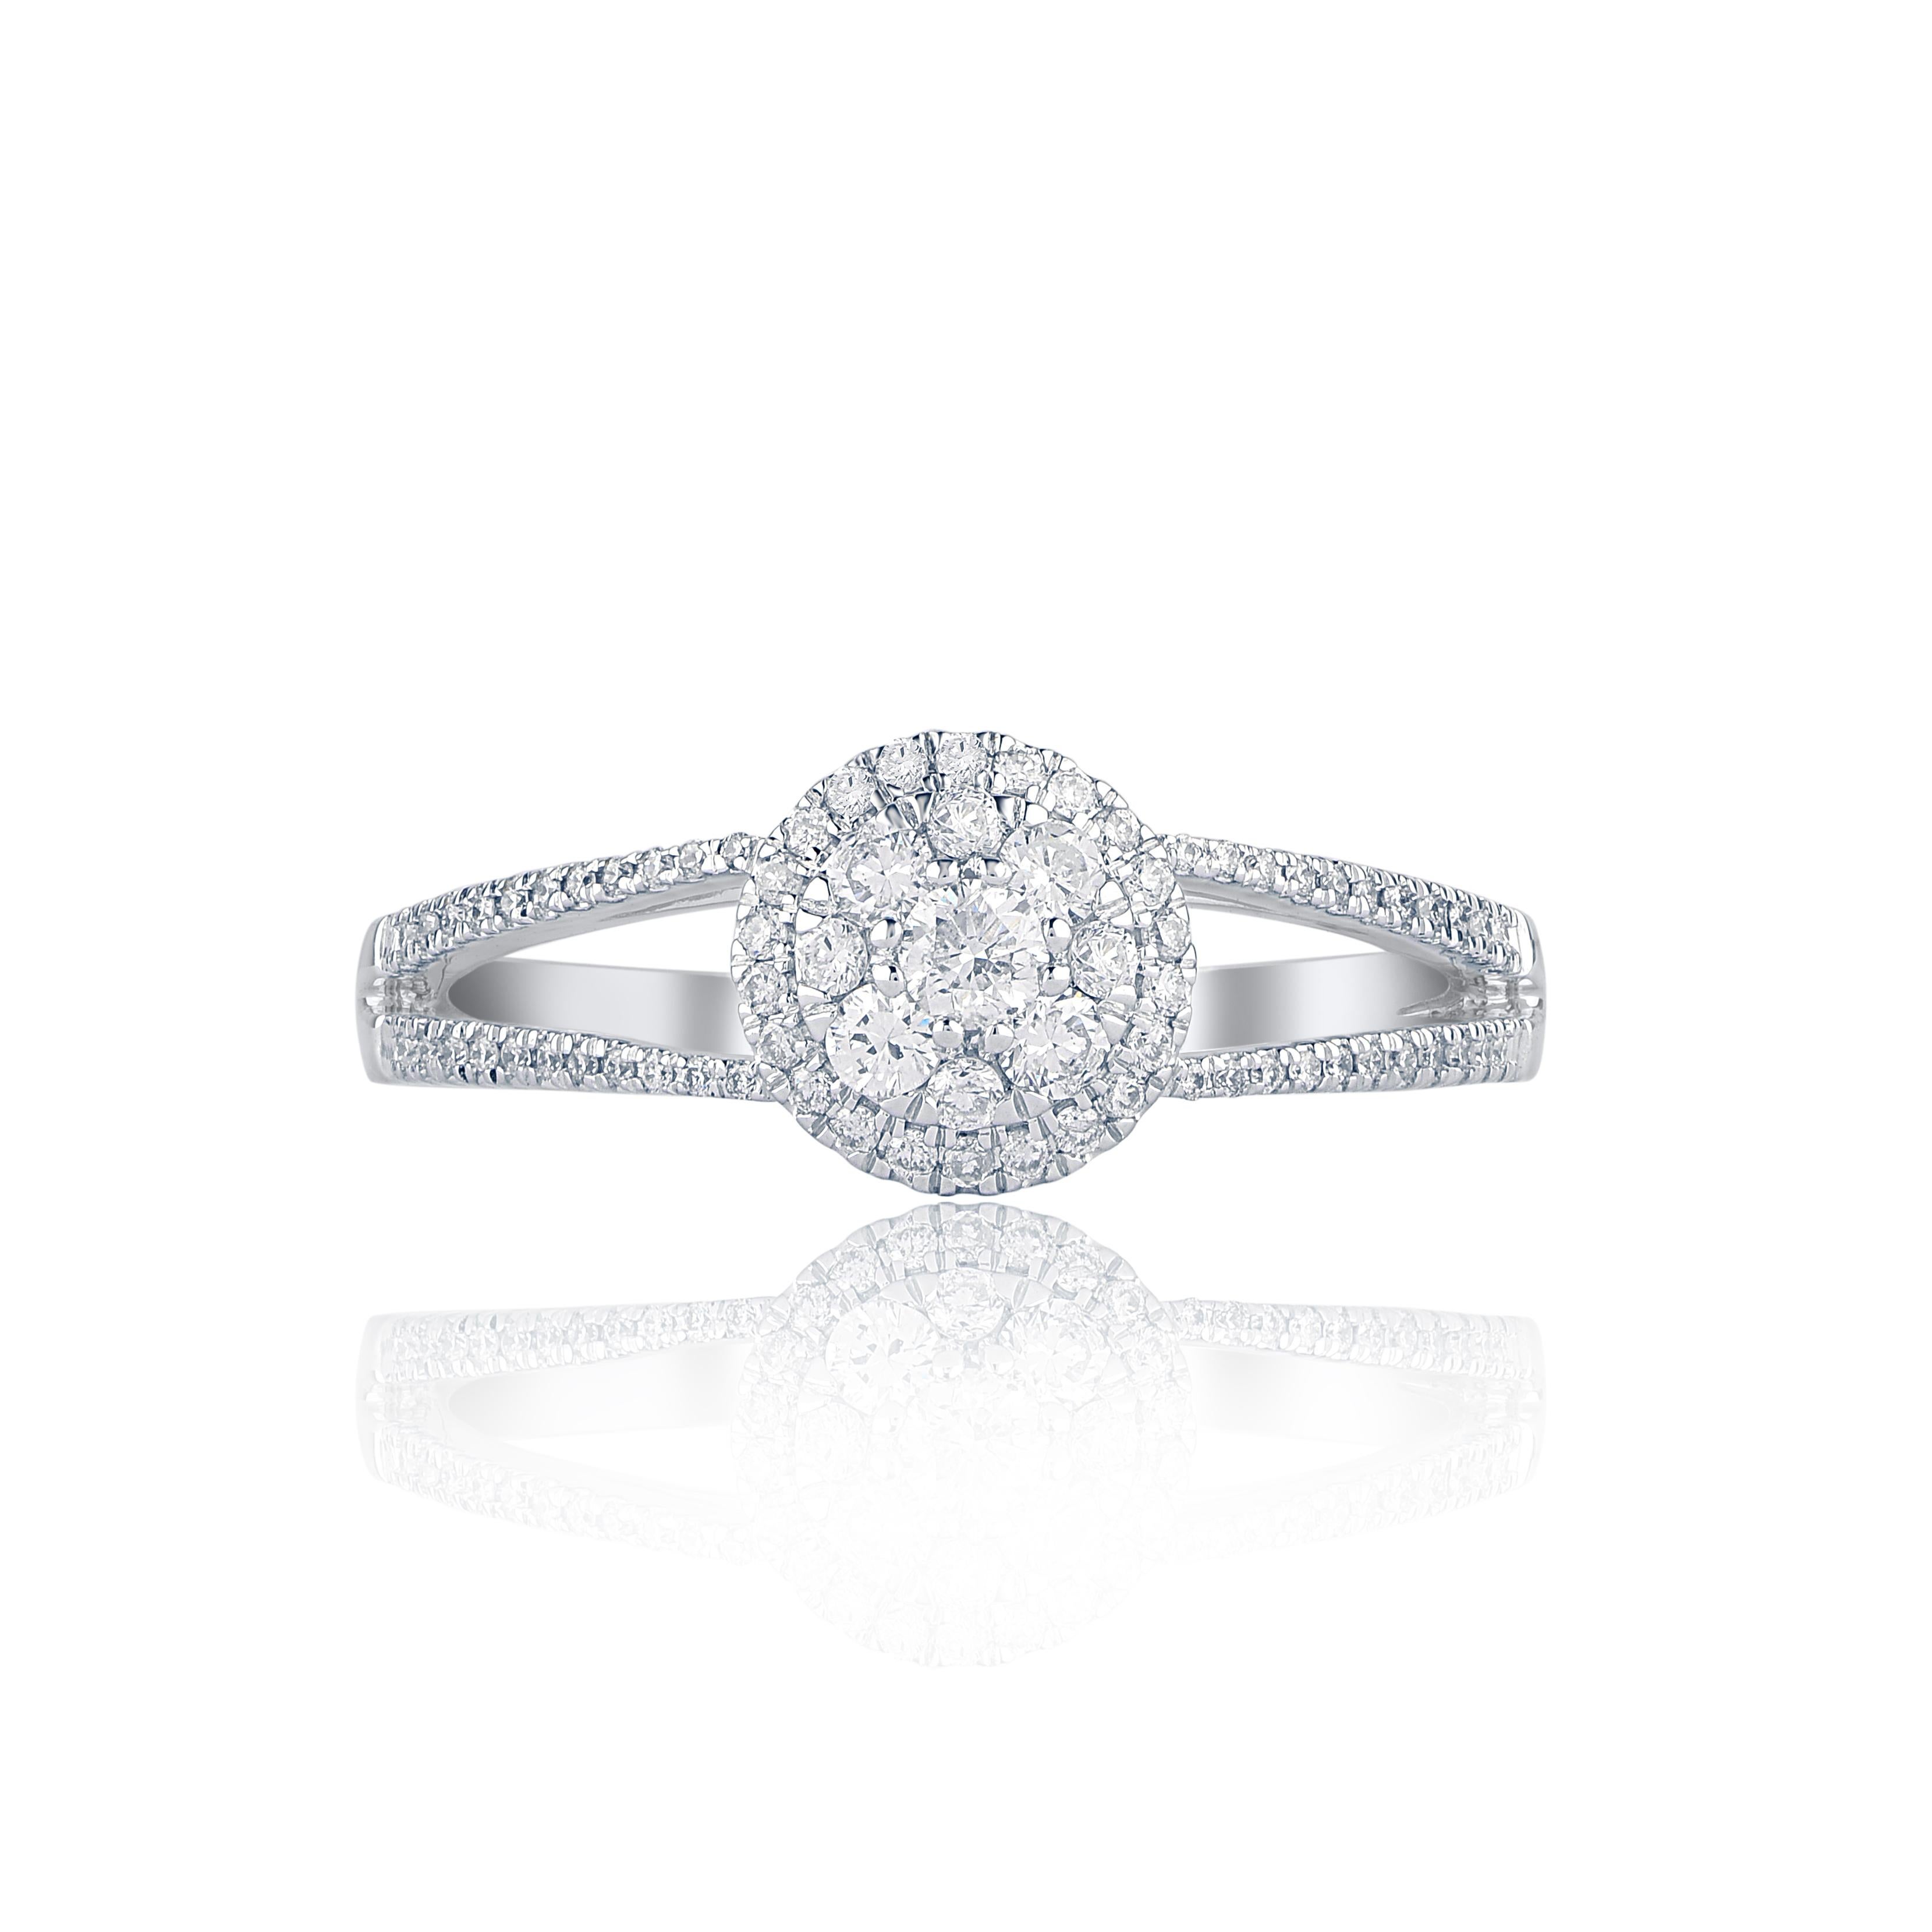 Express your love for her in the most classic way with this diamond ring. Crafted in 14 Karat white gold. This wedding ring features a sparkling 75 single cut and brilliant cut round diamond beautifully set in prong setting. The total diamond weight